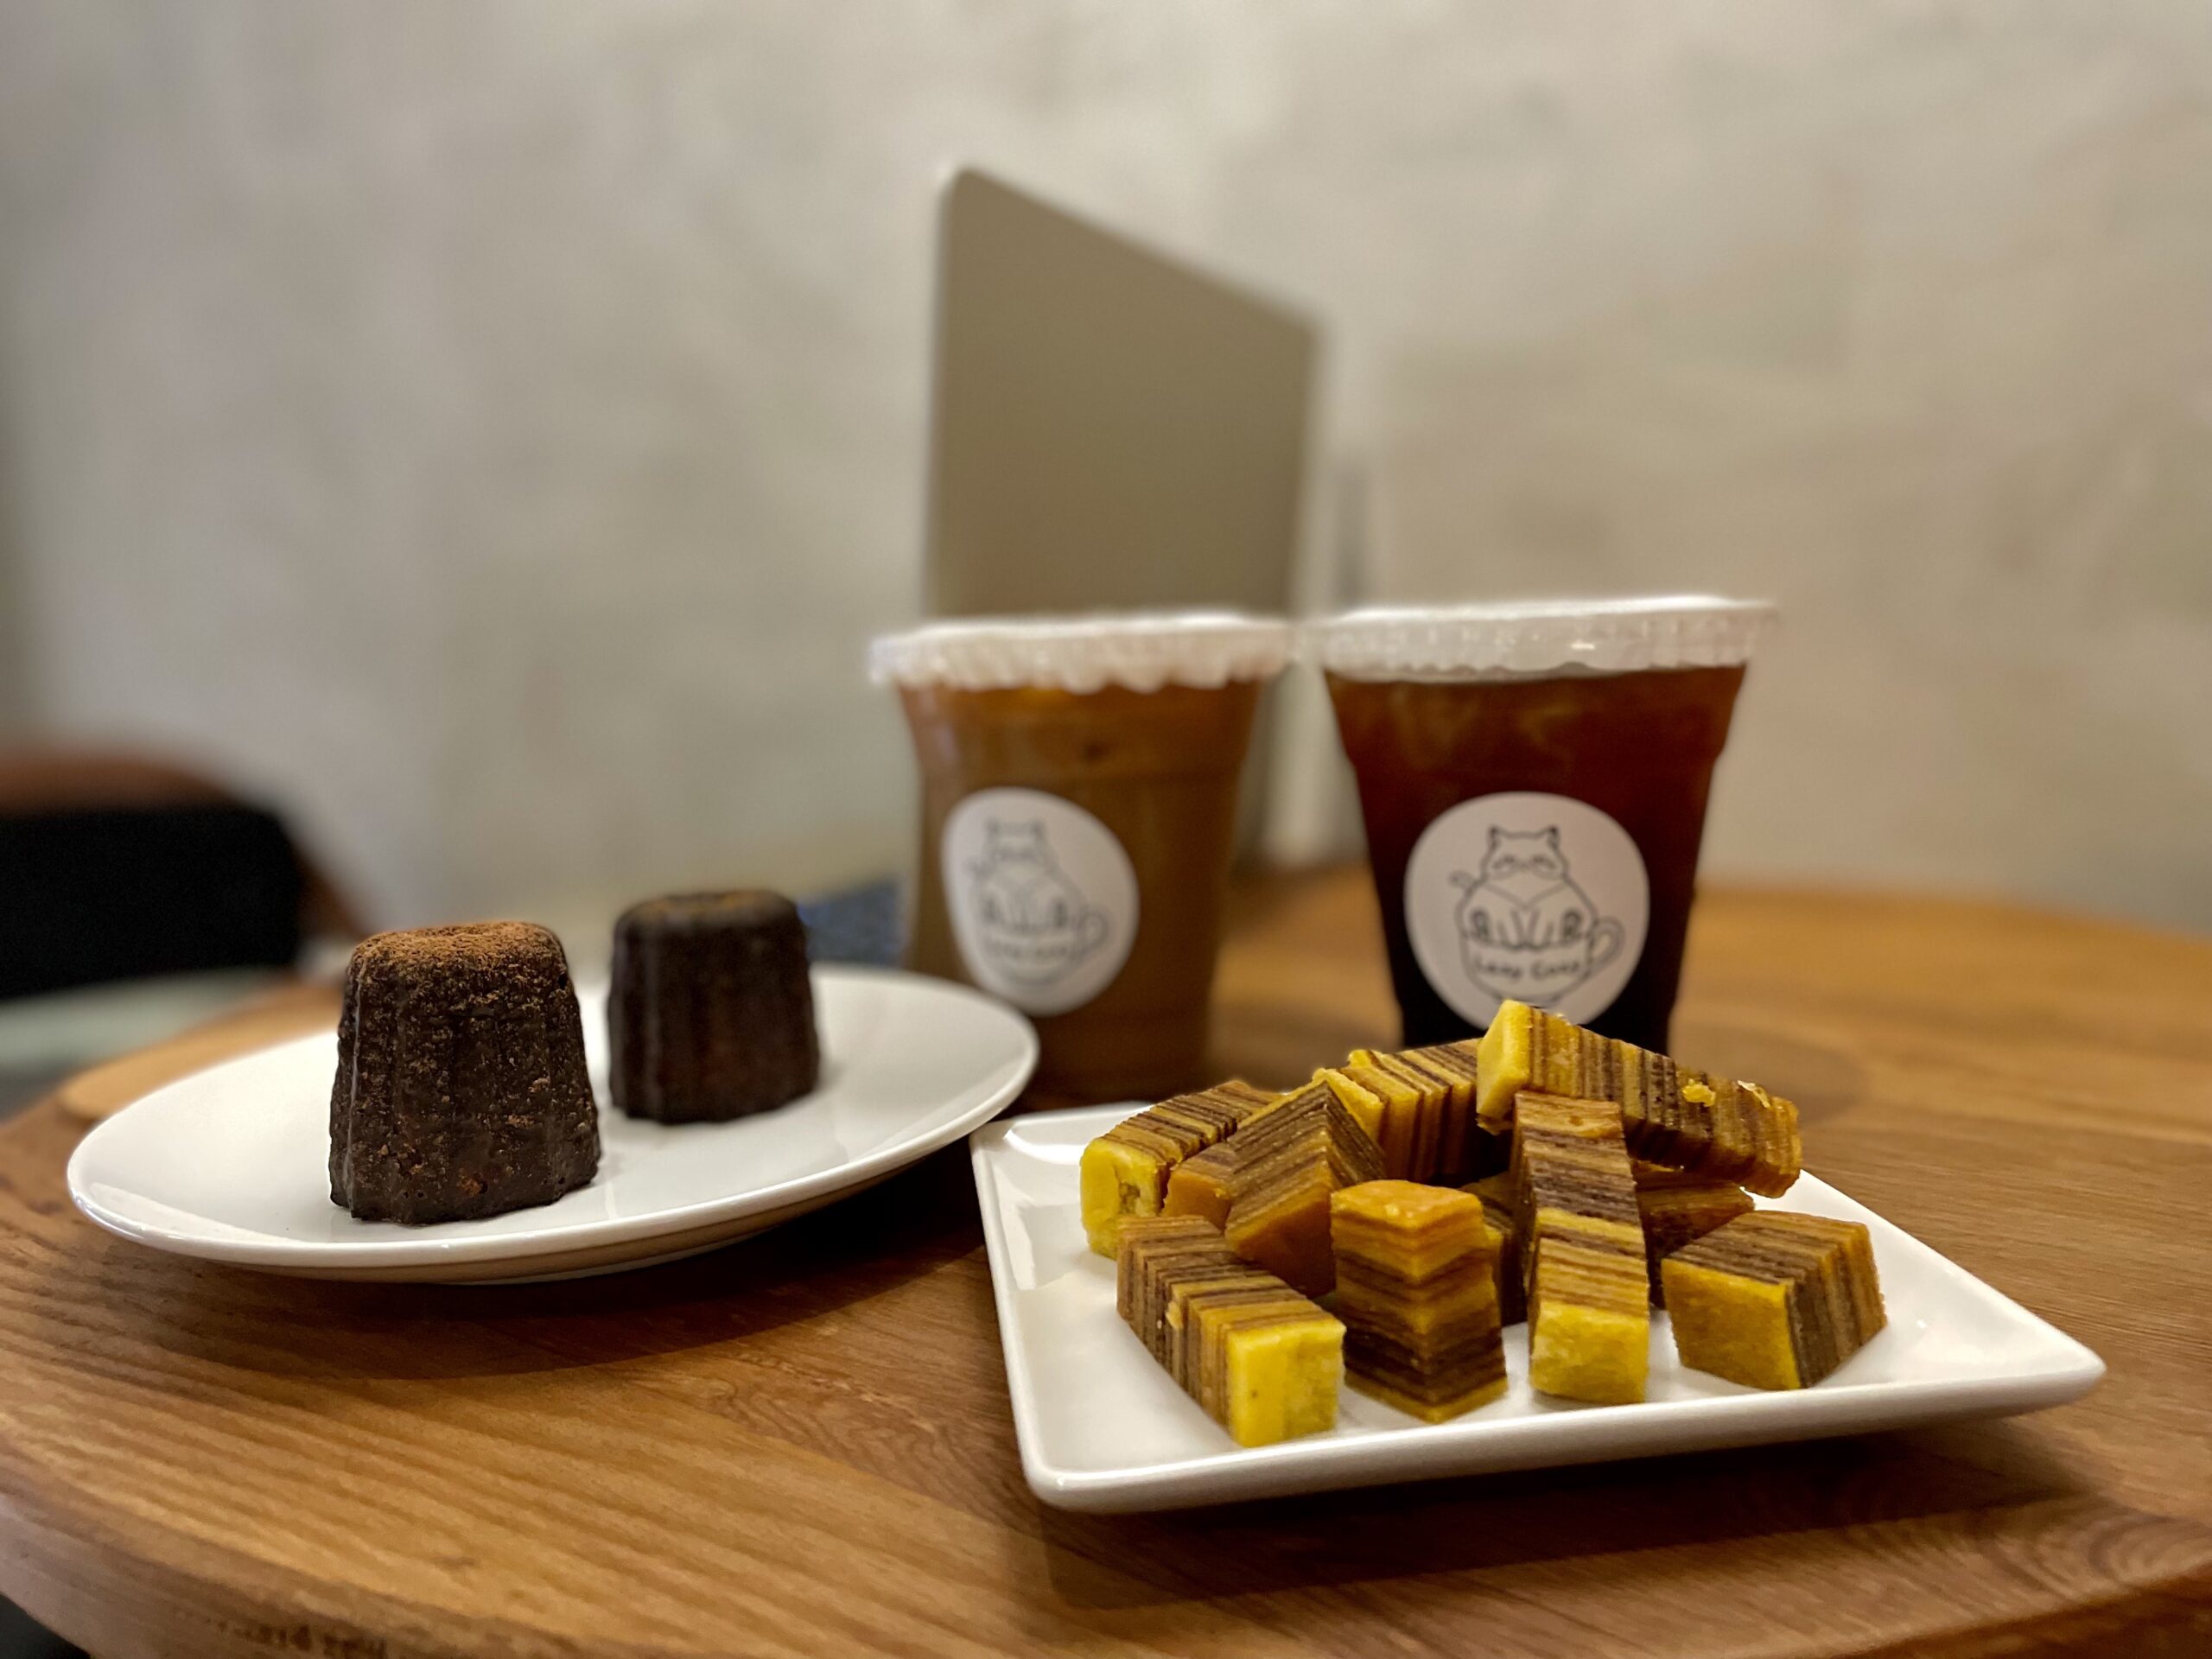 Top 5 Best Coffee Shops in Taichung for Studying